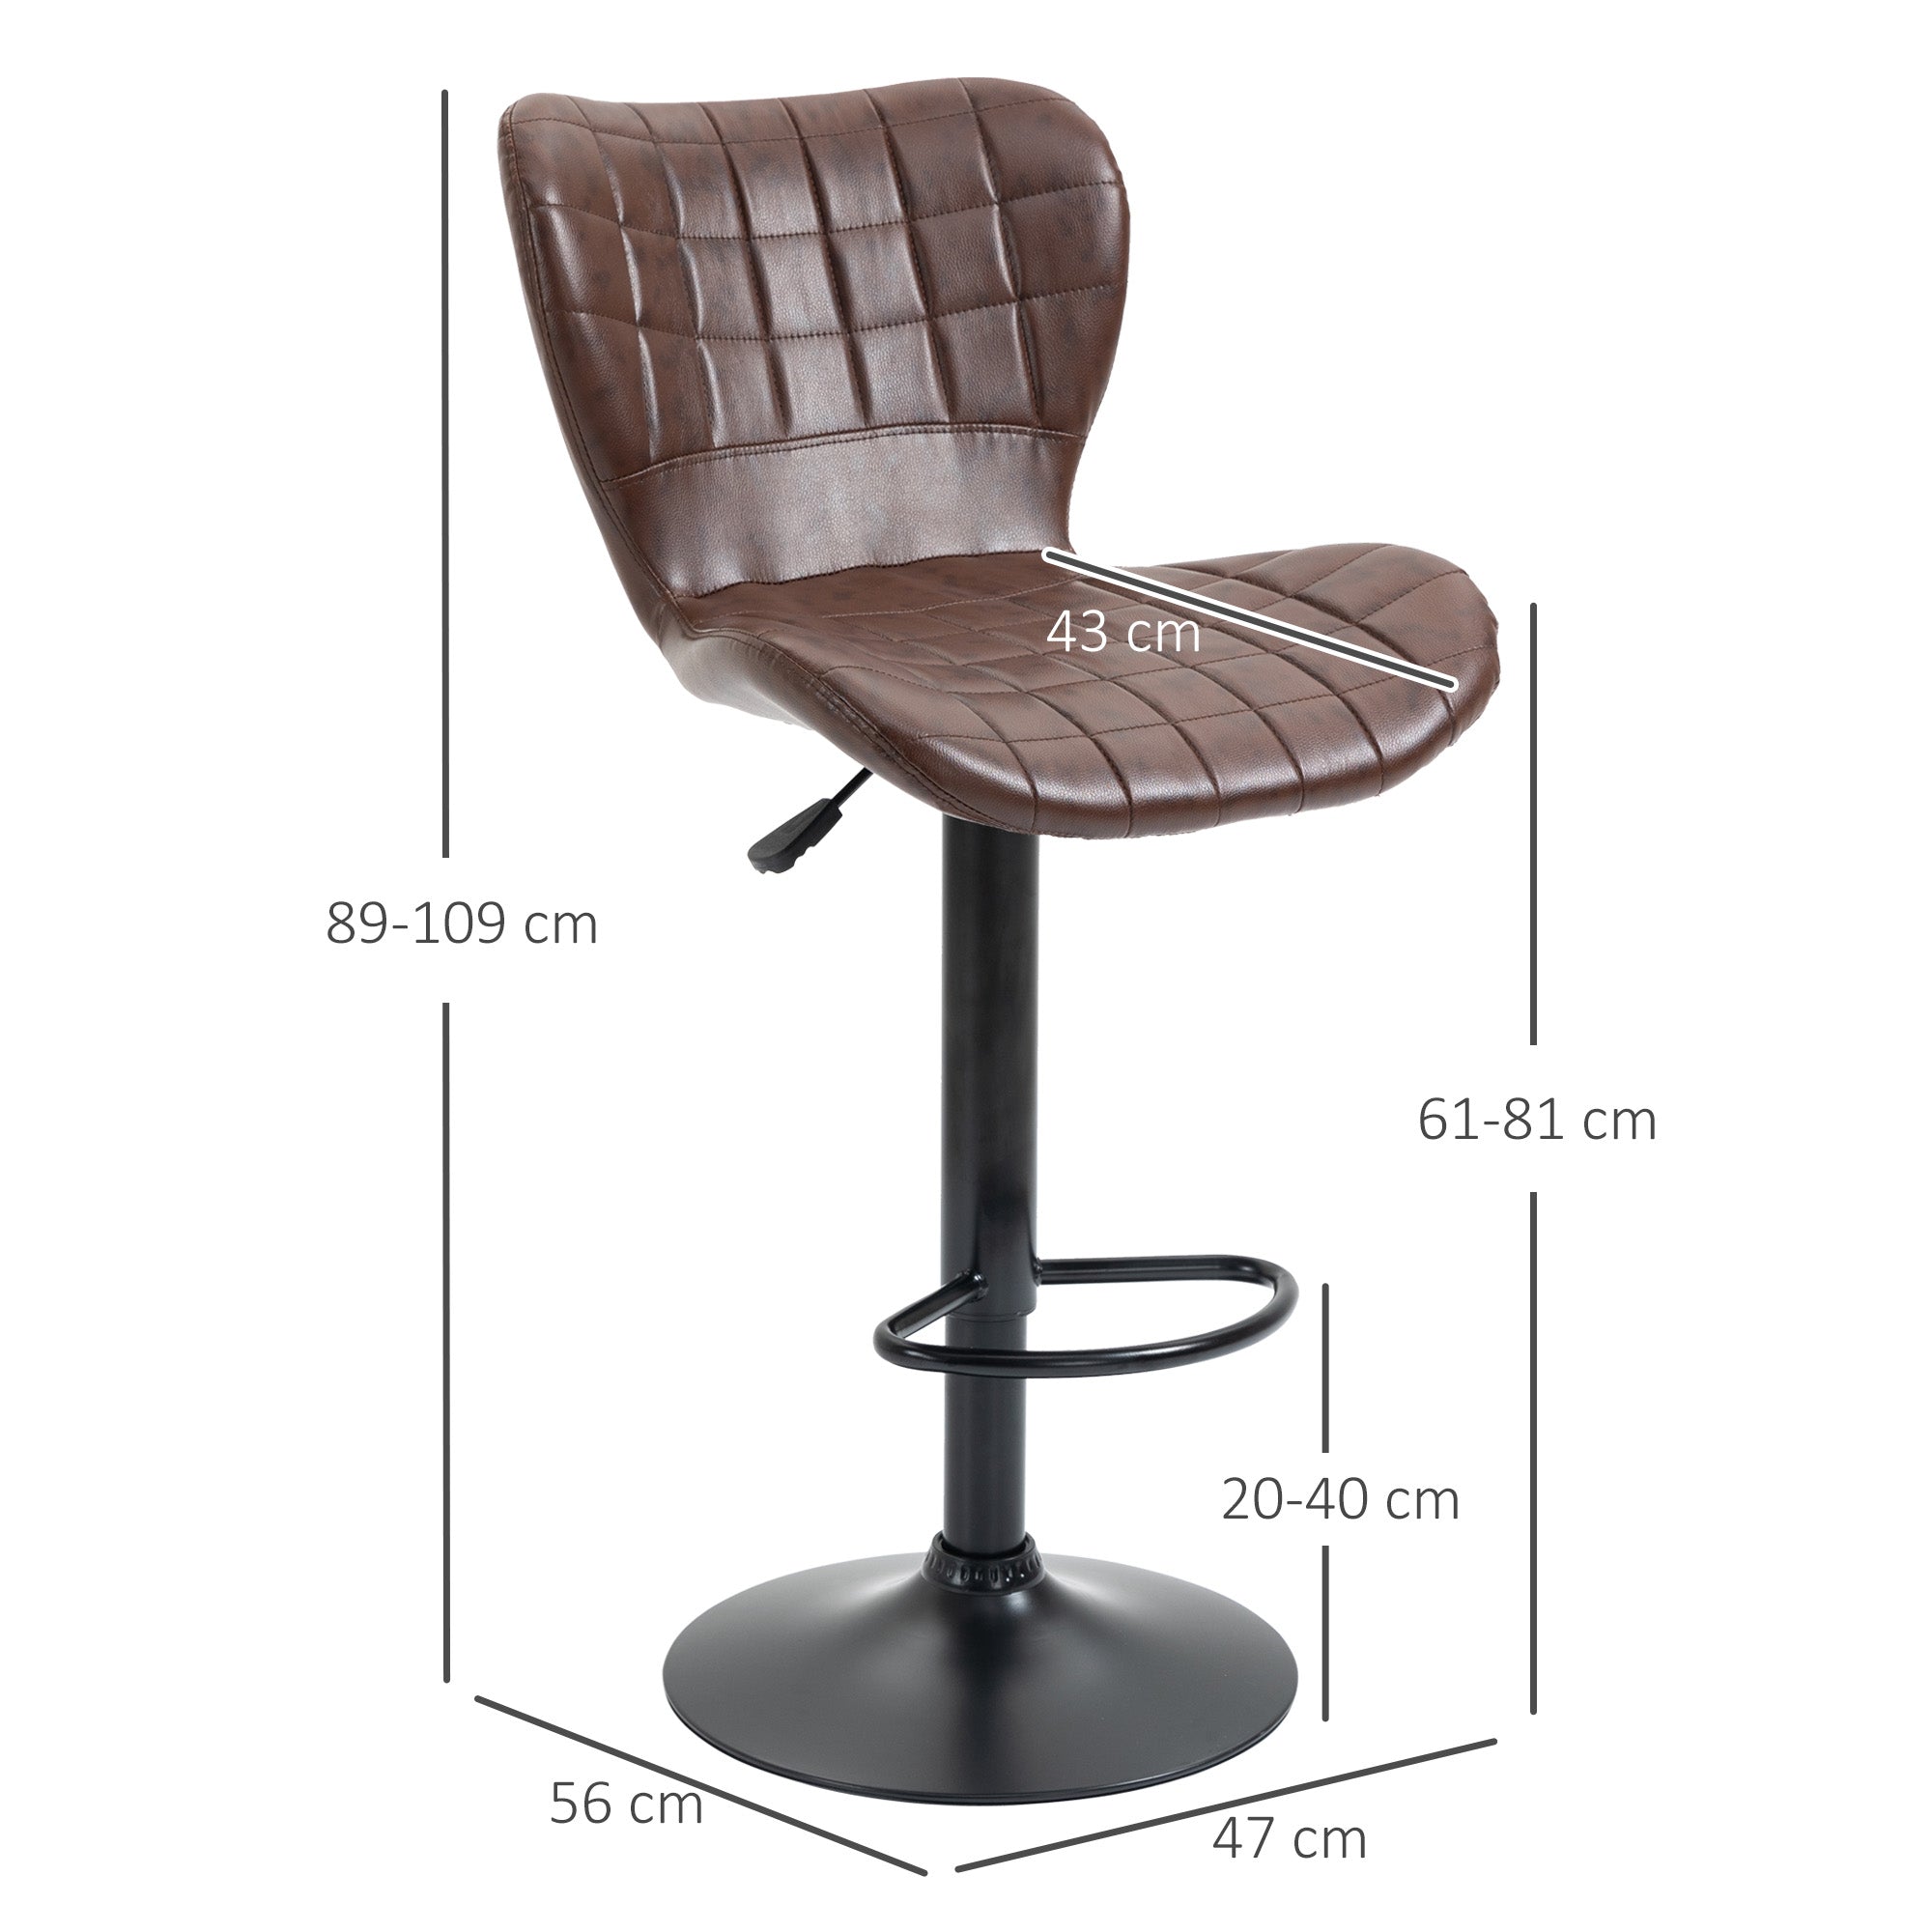 Bar Stools Set of 2 Adjustable Height Swivel Bar Chairs in PU Leather with Backrest & Footrest, Brown  AOSOM   